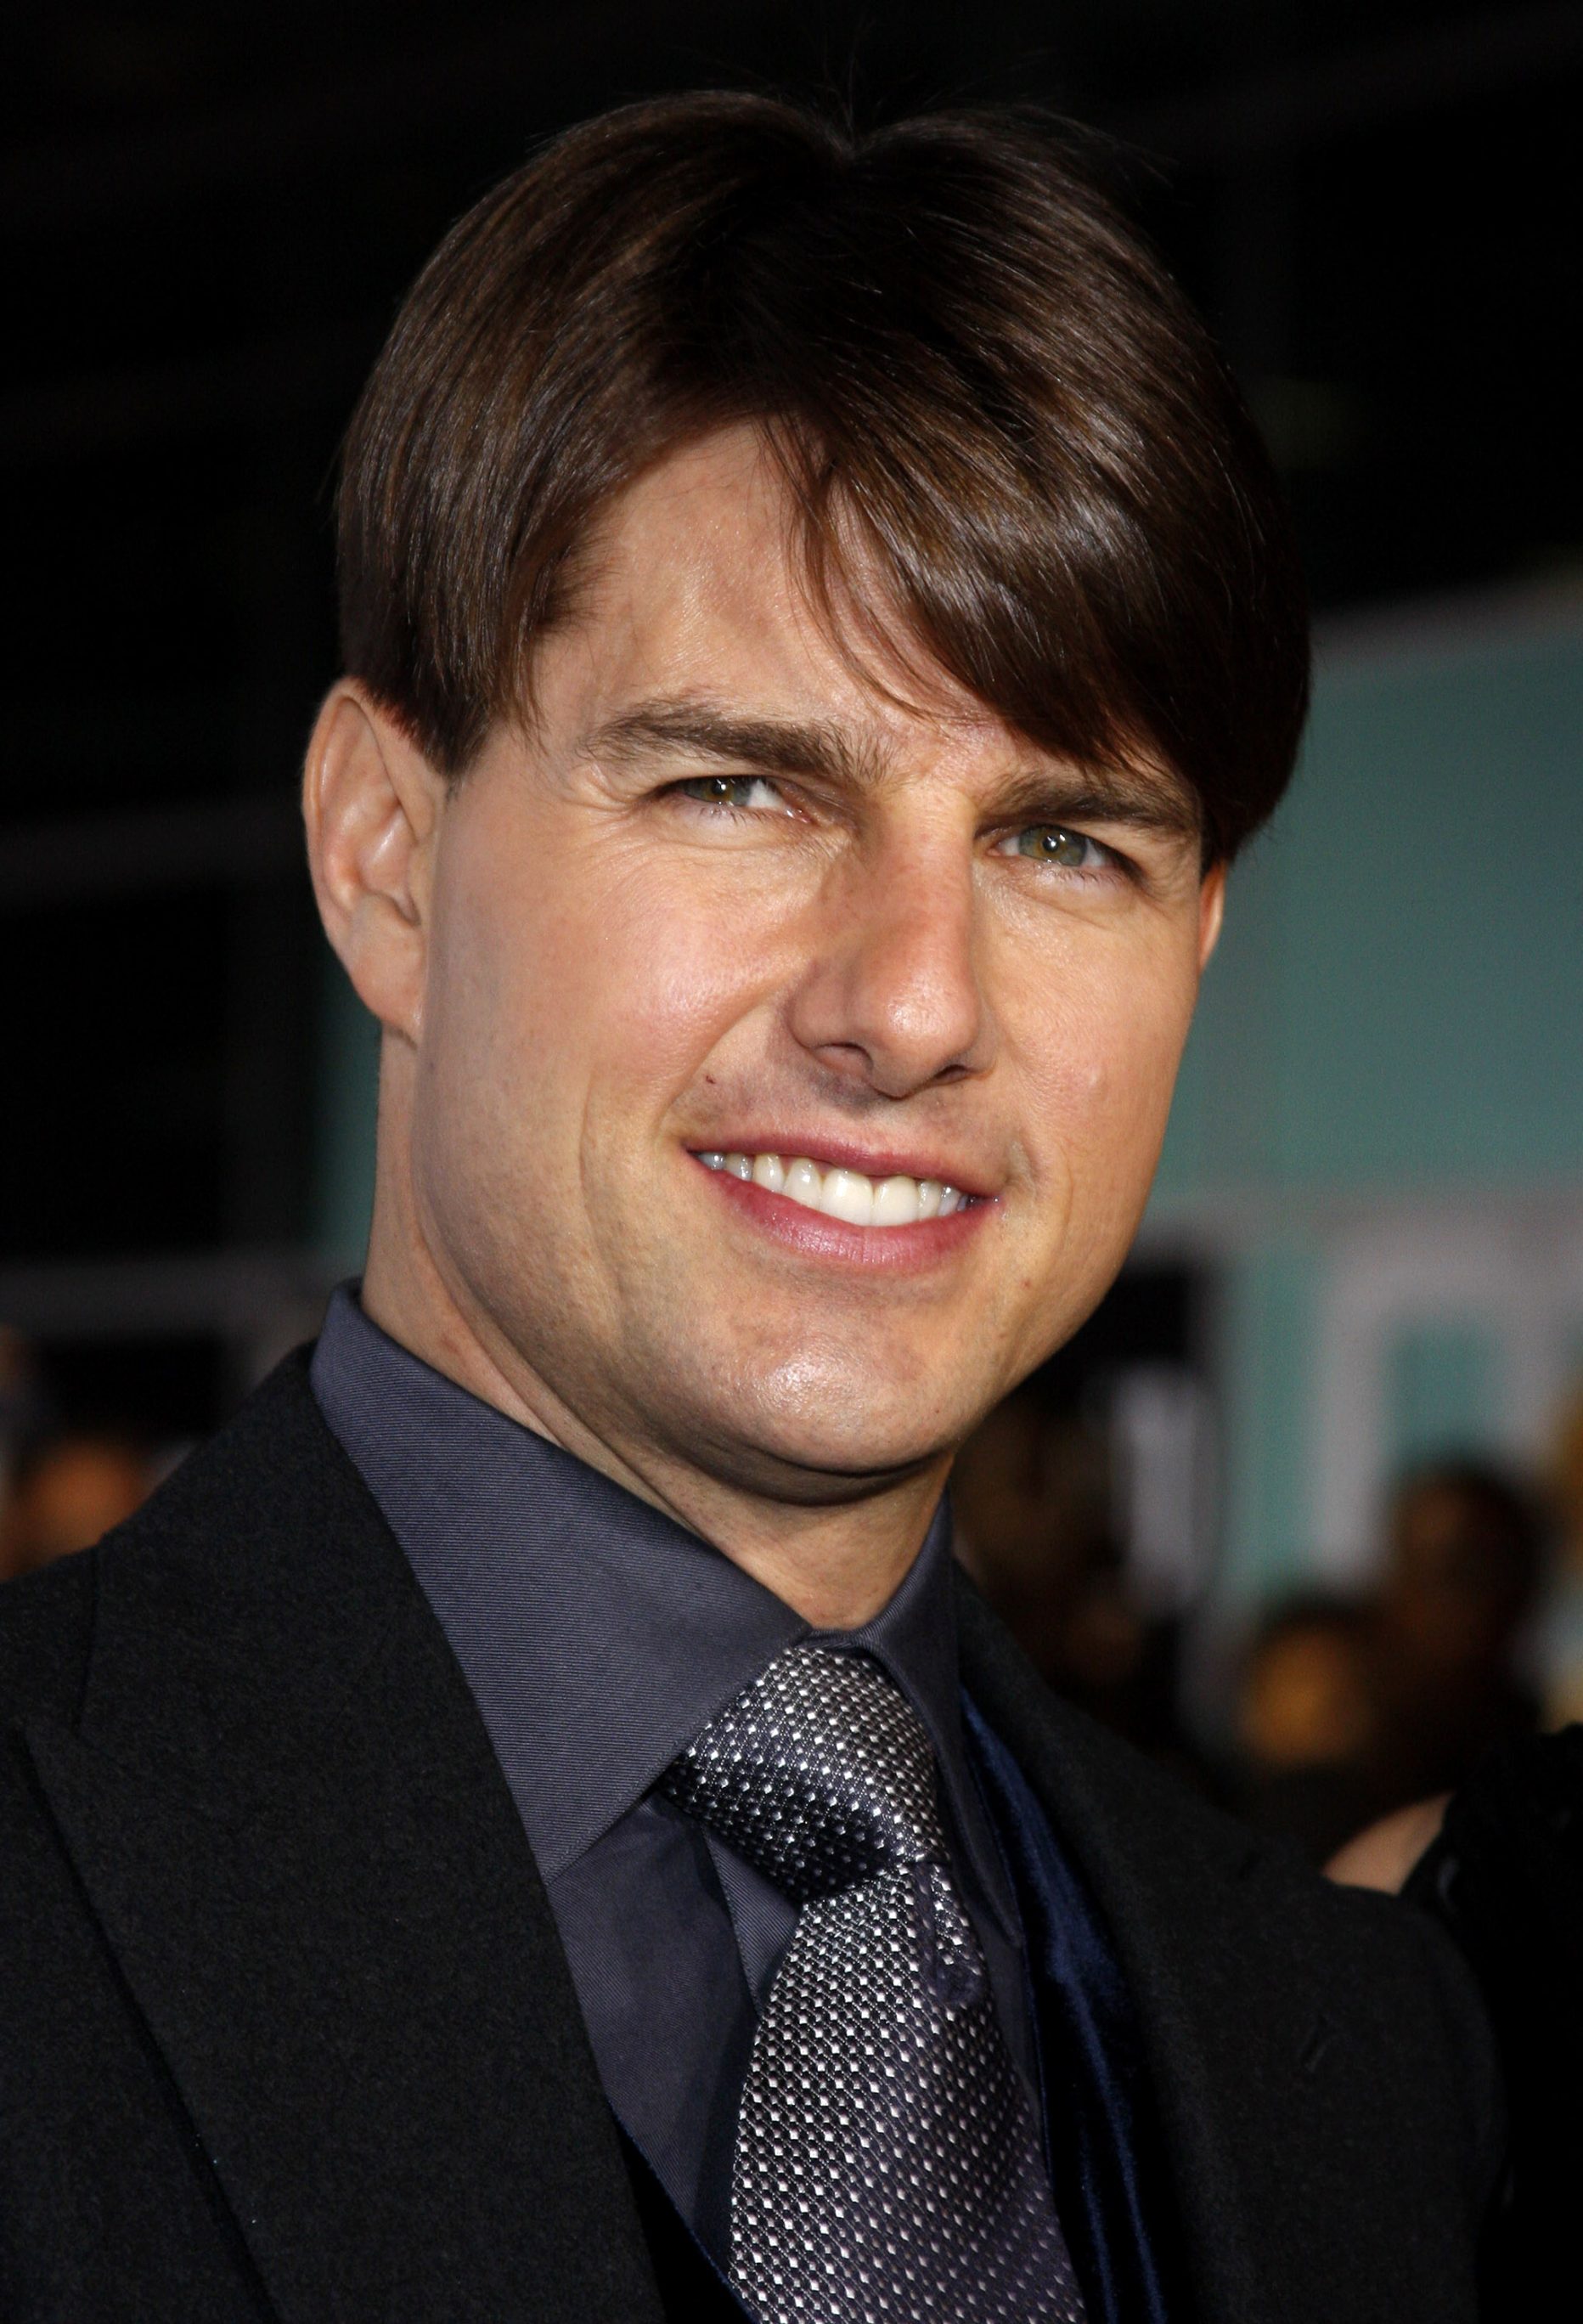 Tom Cruise - Hollywood's Ageless Handsome Man